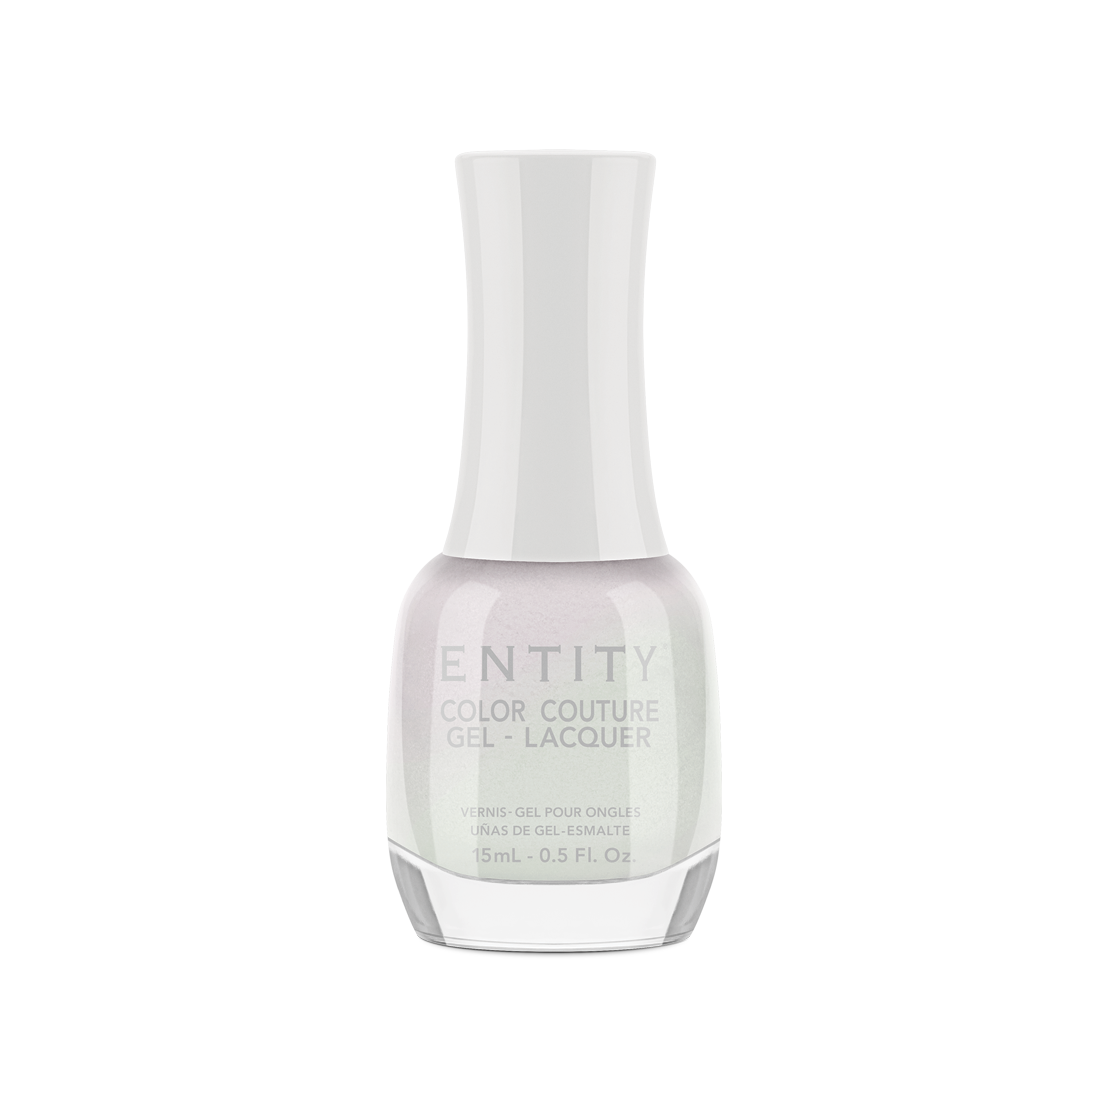 Entity Gel Lacquer - Graphic and Girlish White 15 mL/0.5 Fl. Oz